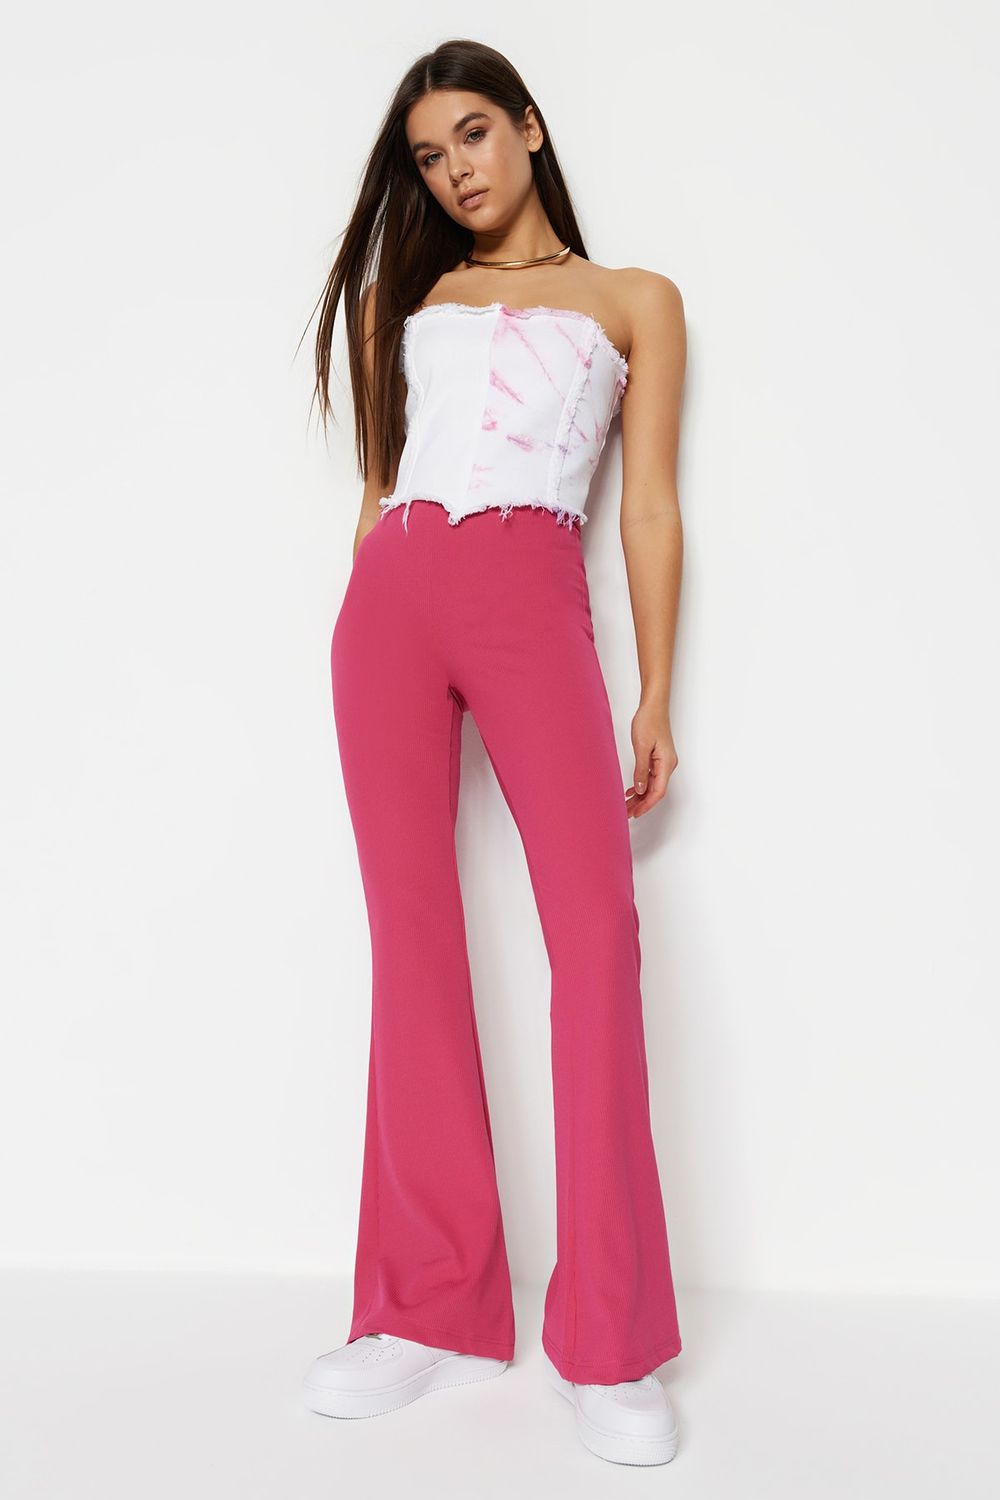 Isa Boulder Tent Knitted Flared Trousers - Farfetch